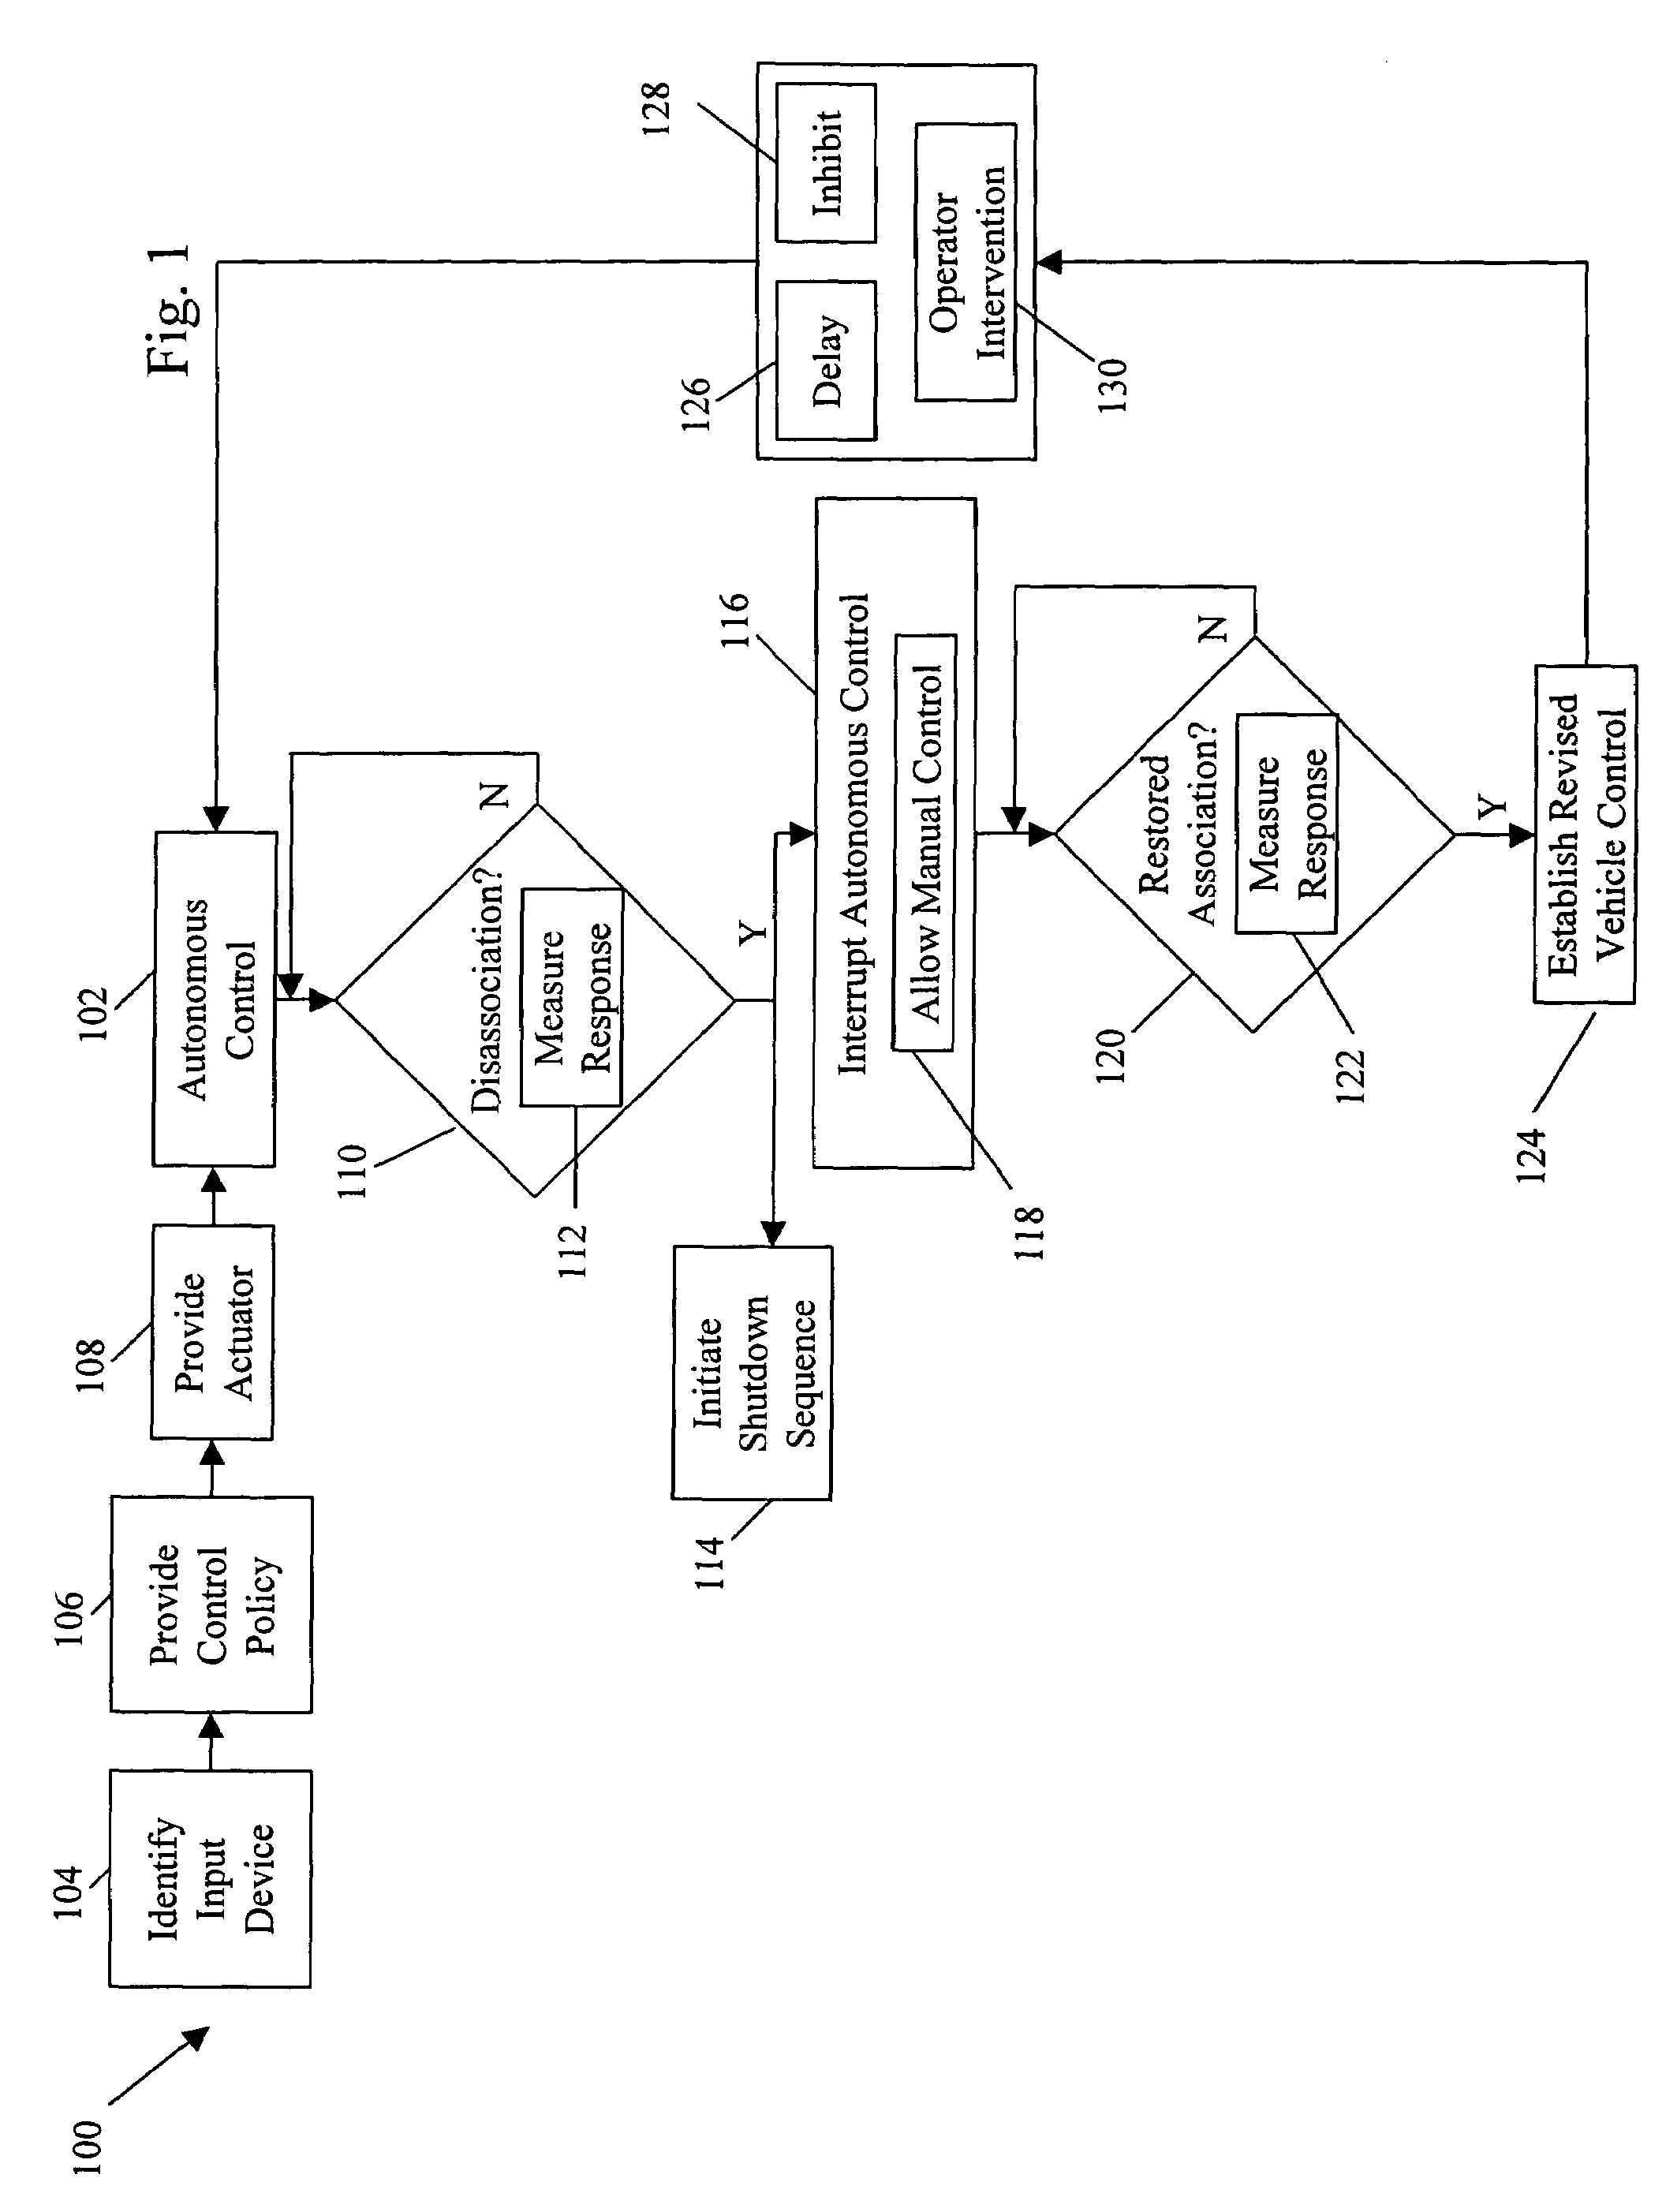 System and method for processing safety signals in an autonomous vehicle